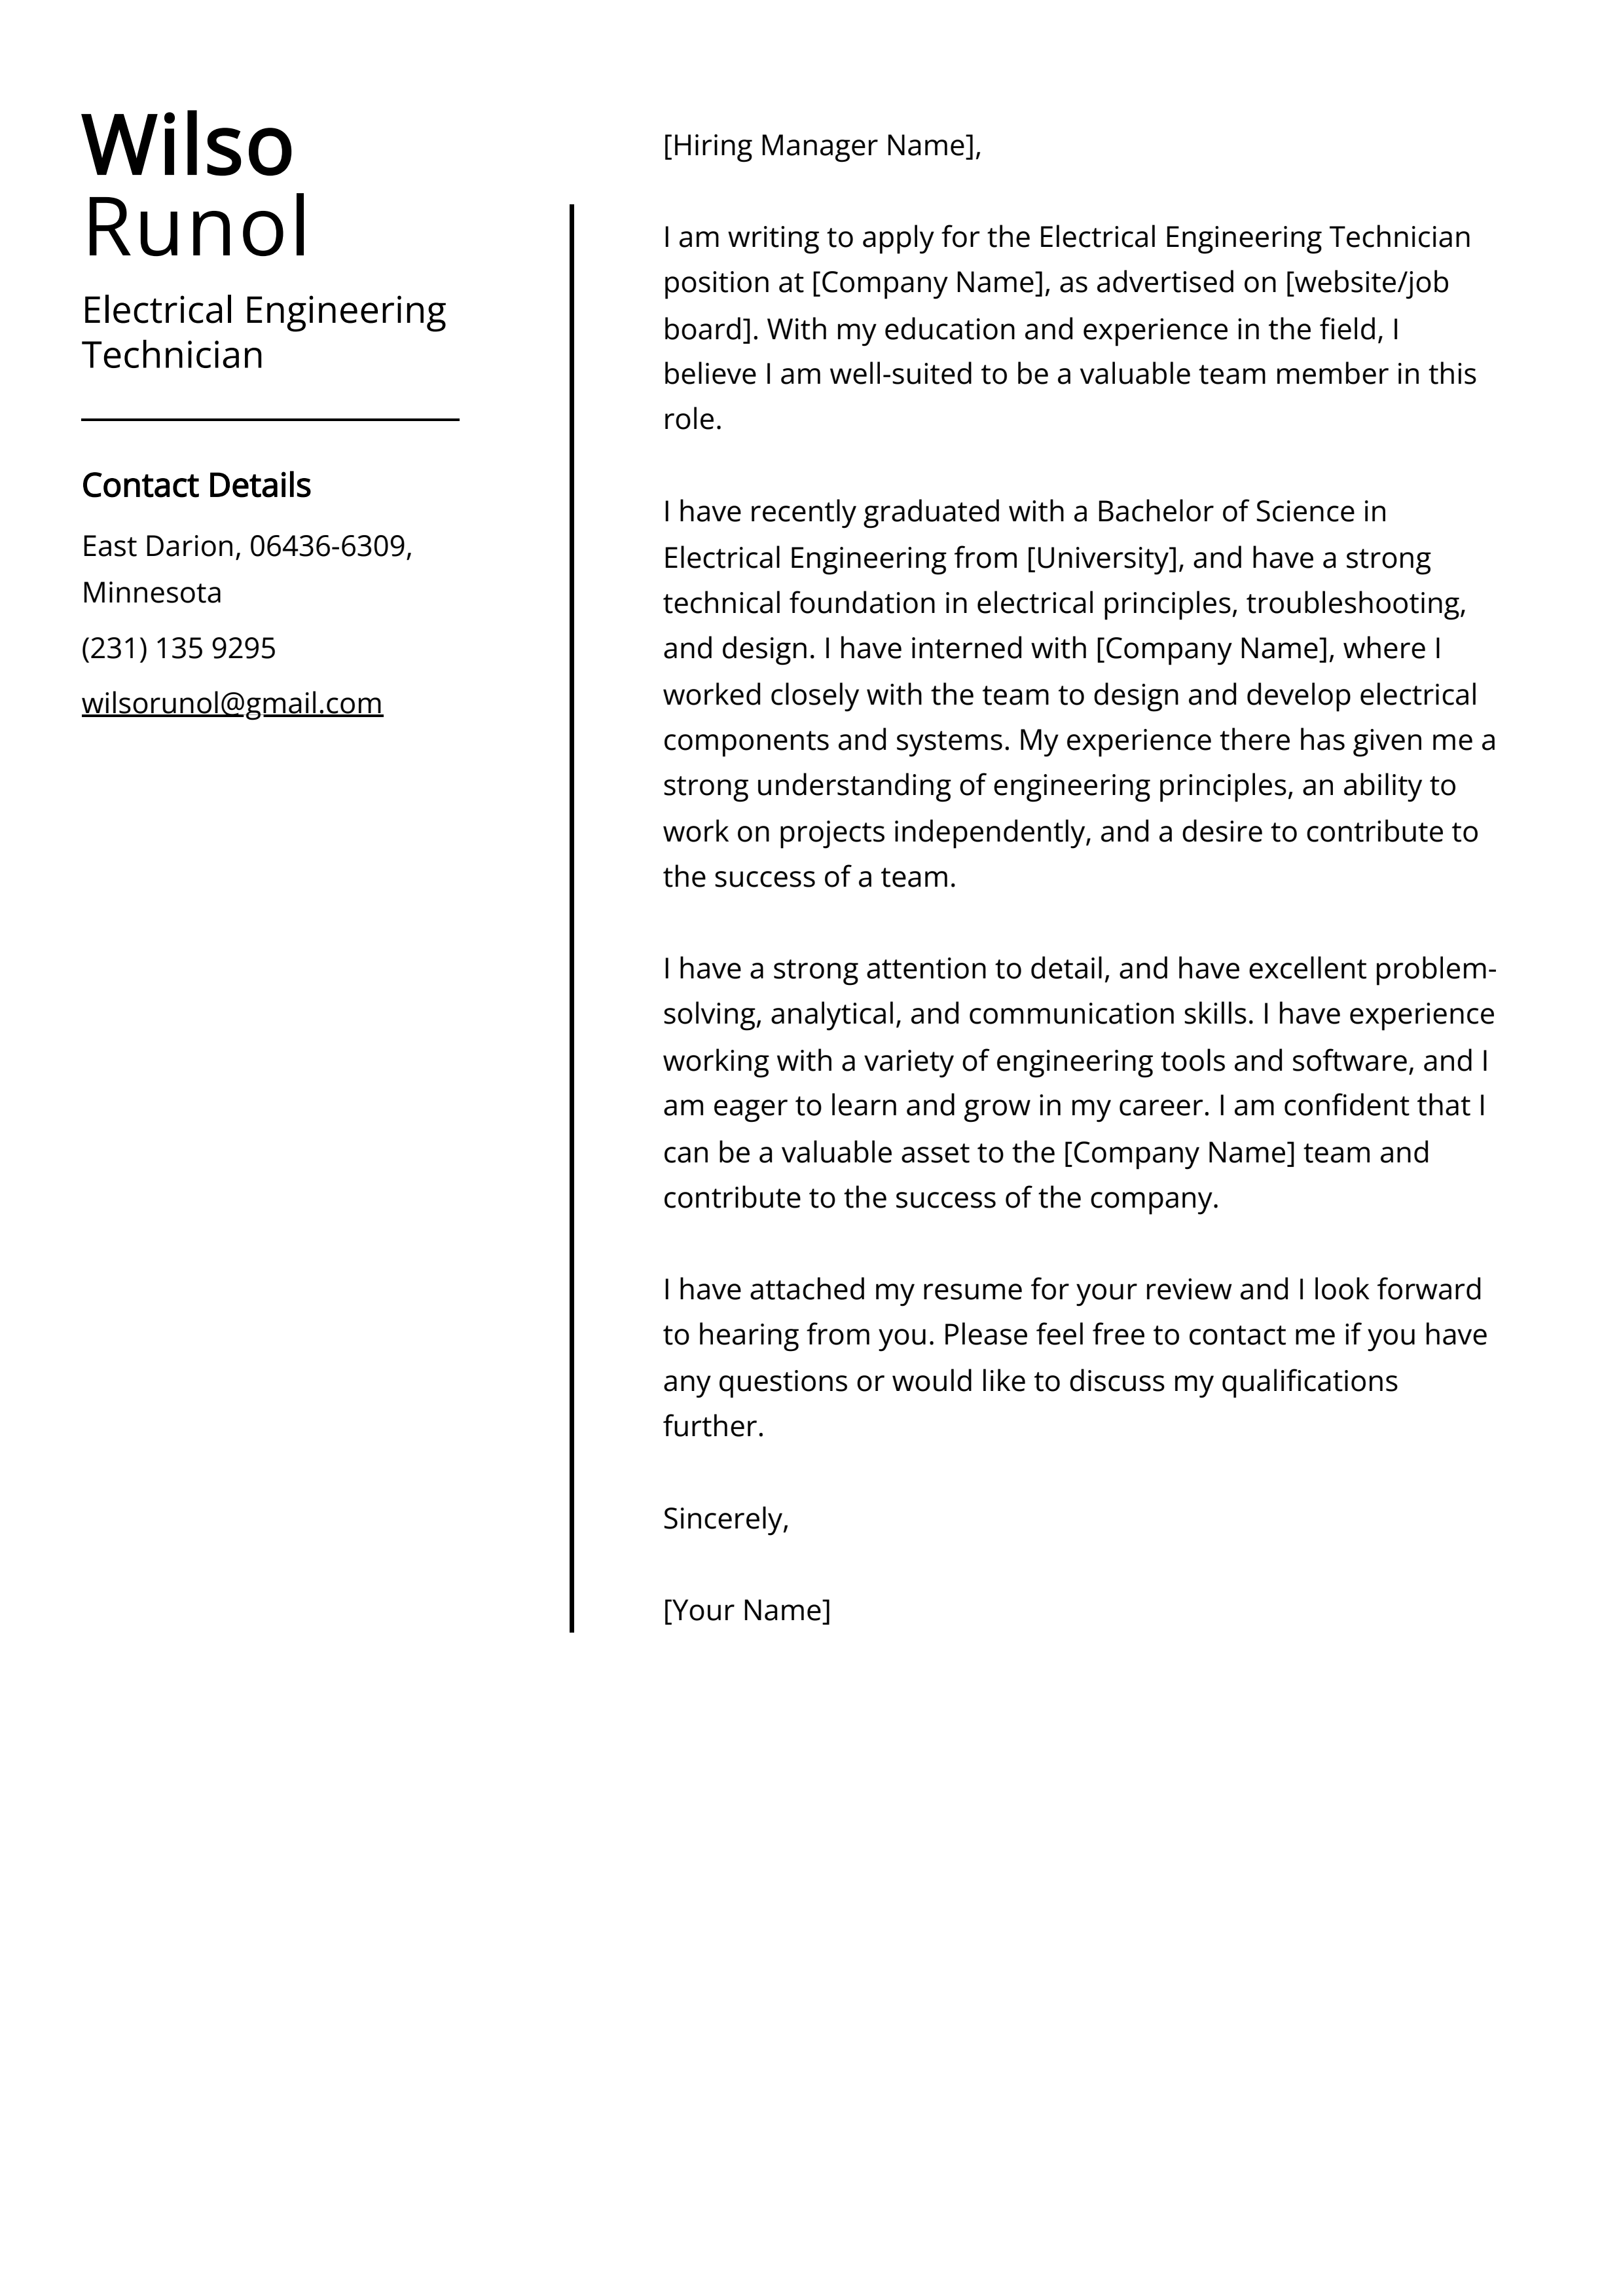 Electrical Engineering Technician Cover Letter Example